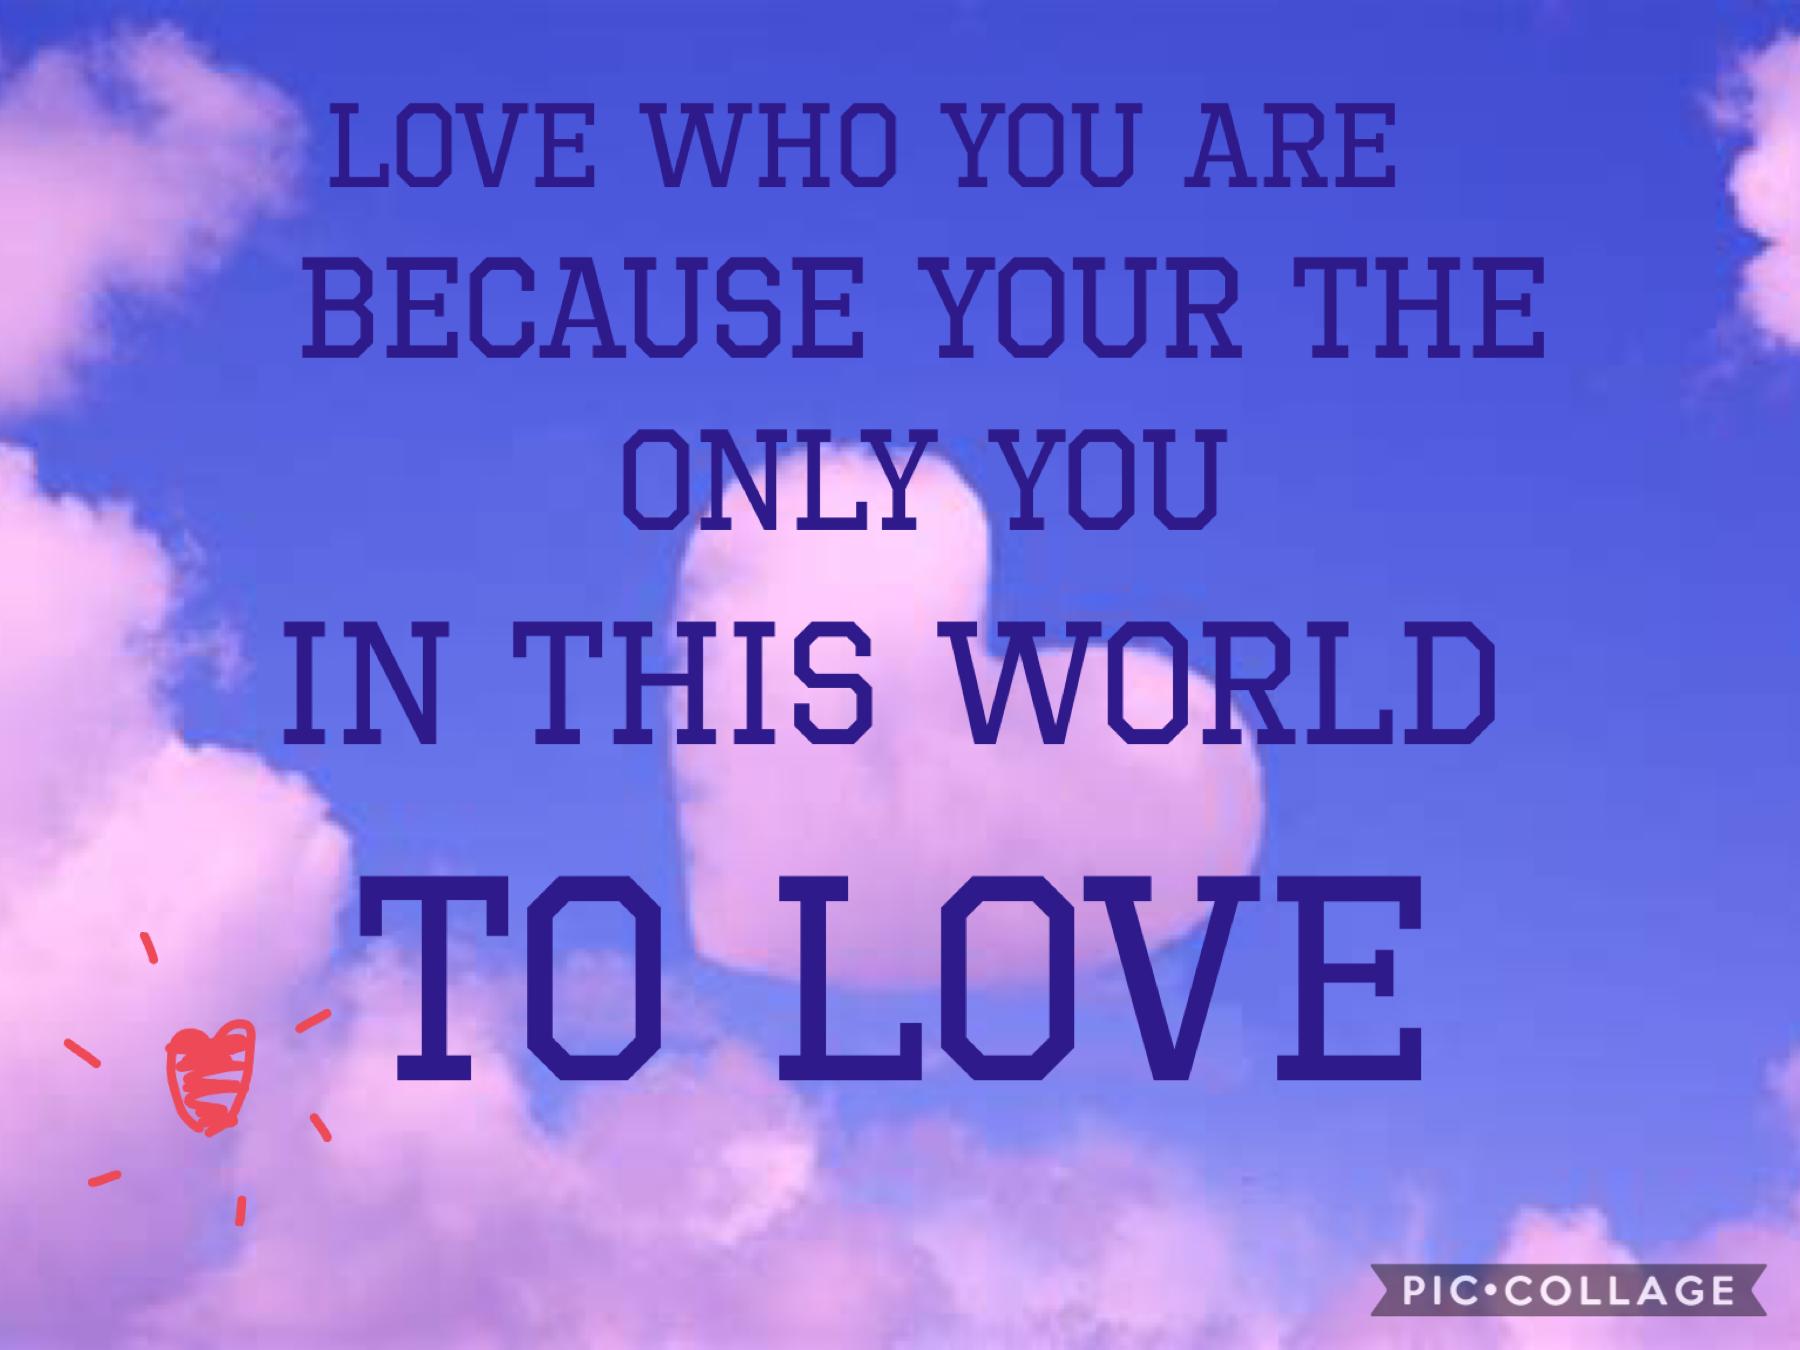 Love yourself. It’s the you in this world to love